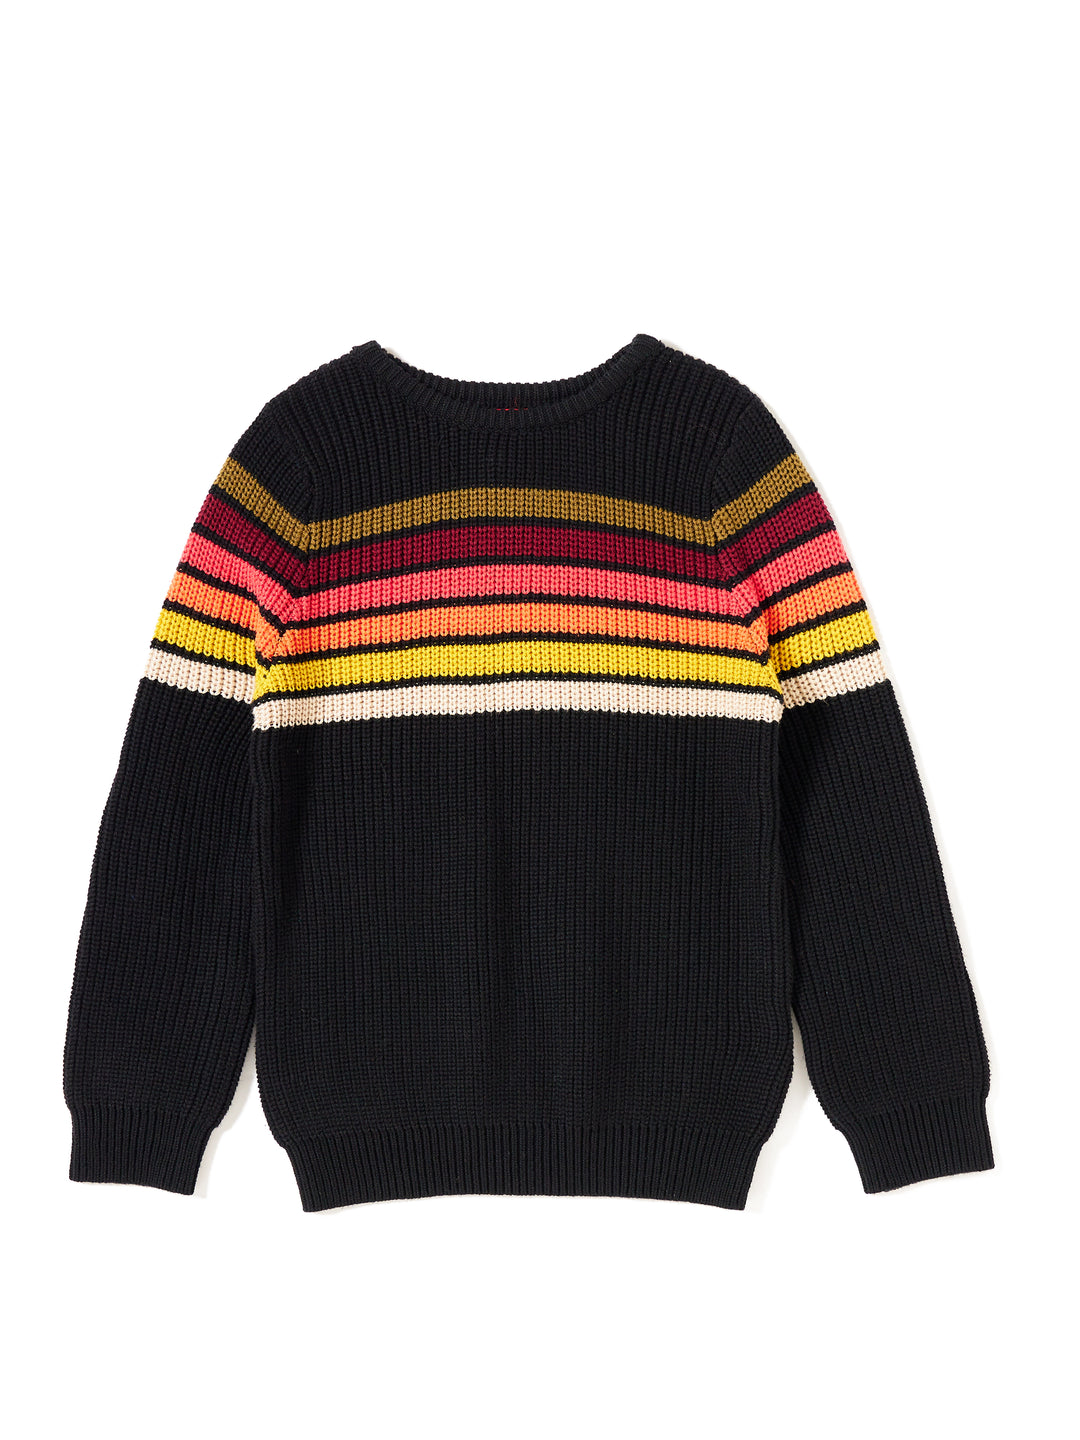 Colorful Stripes Sweater - Black